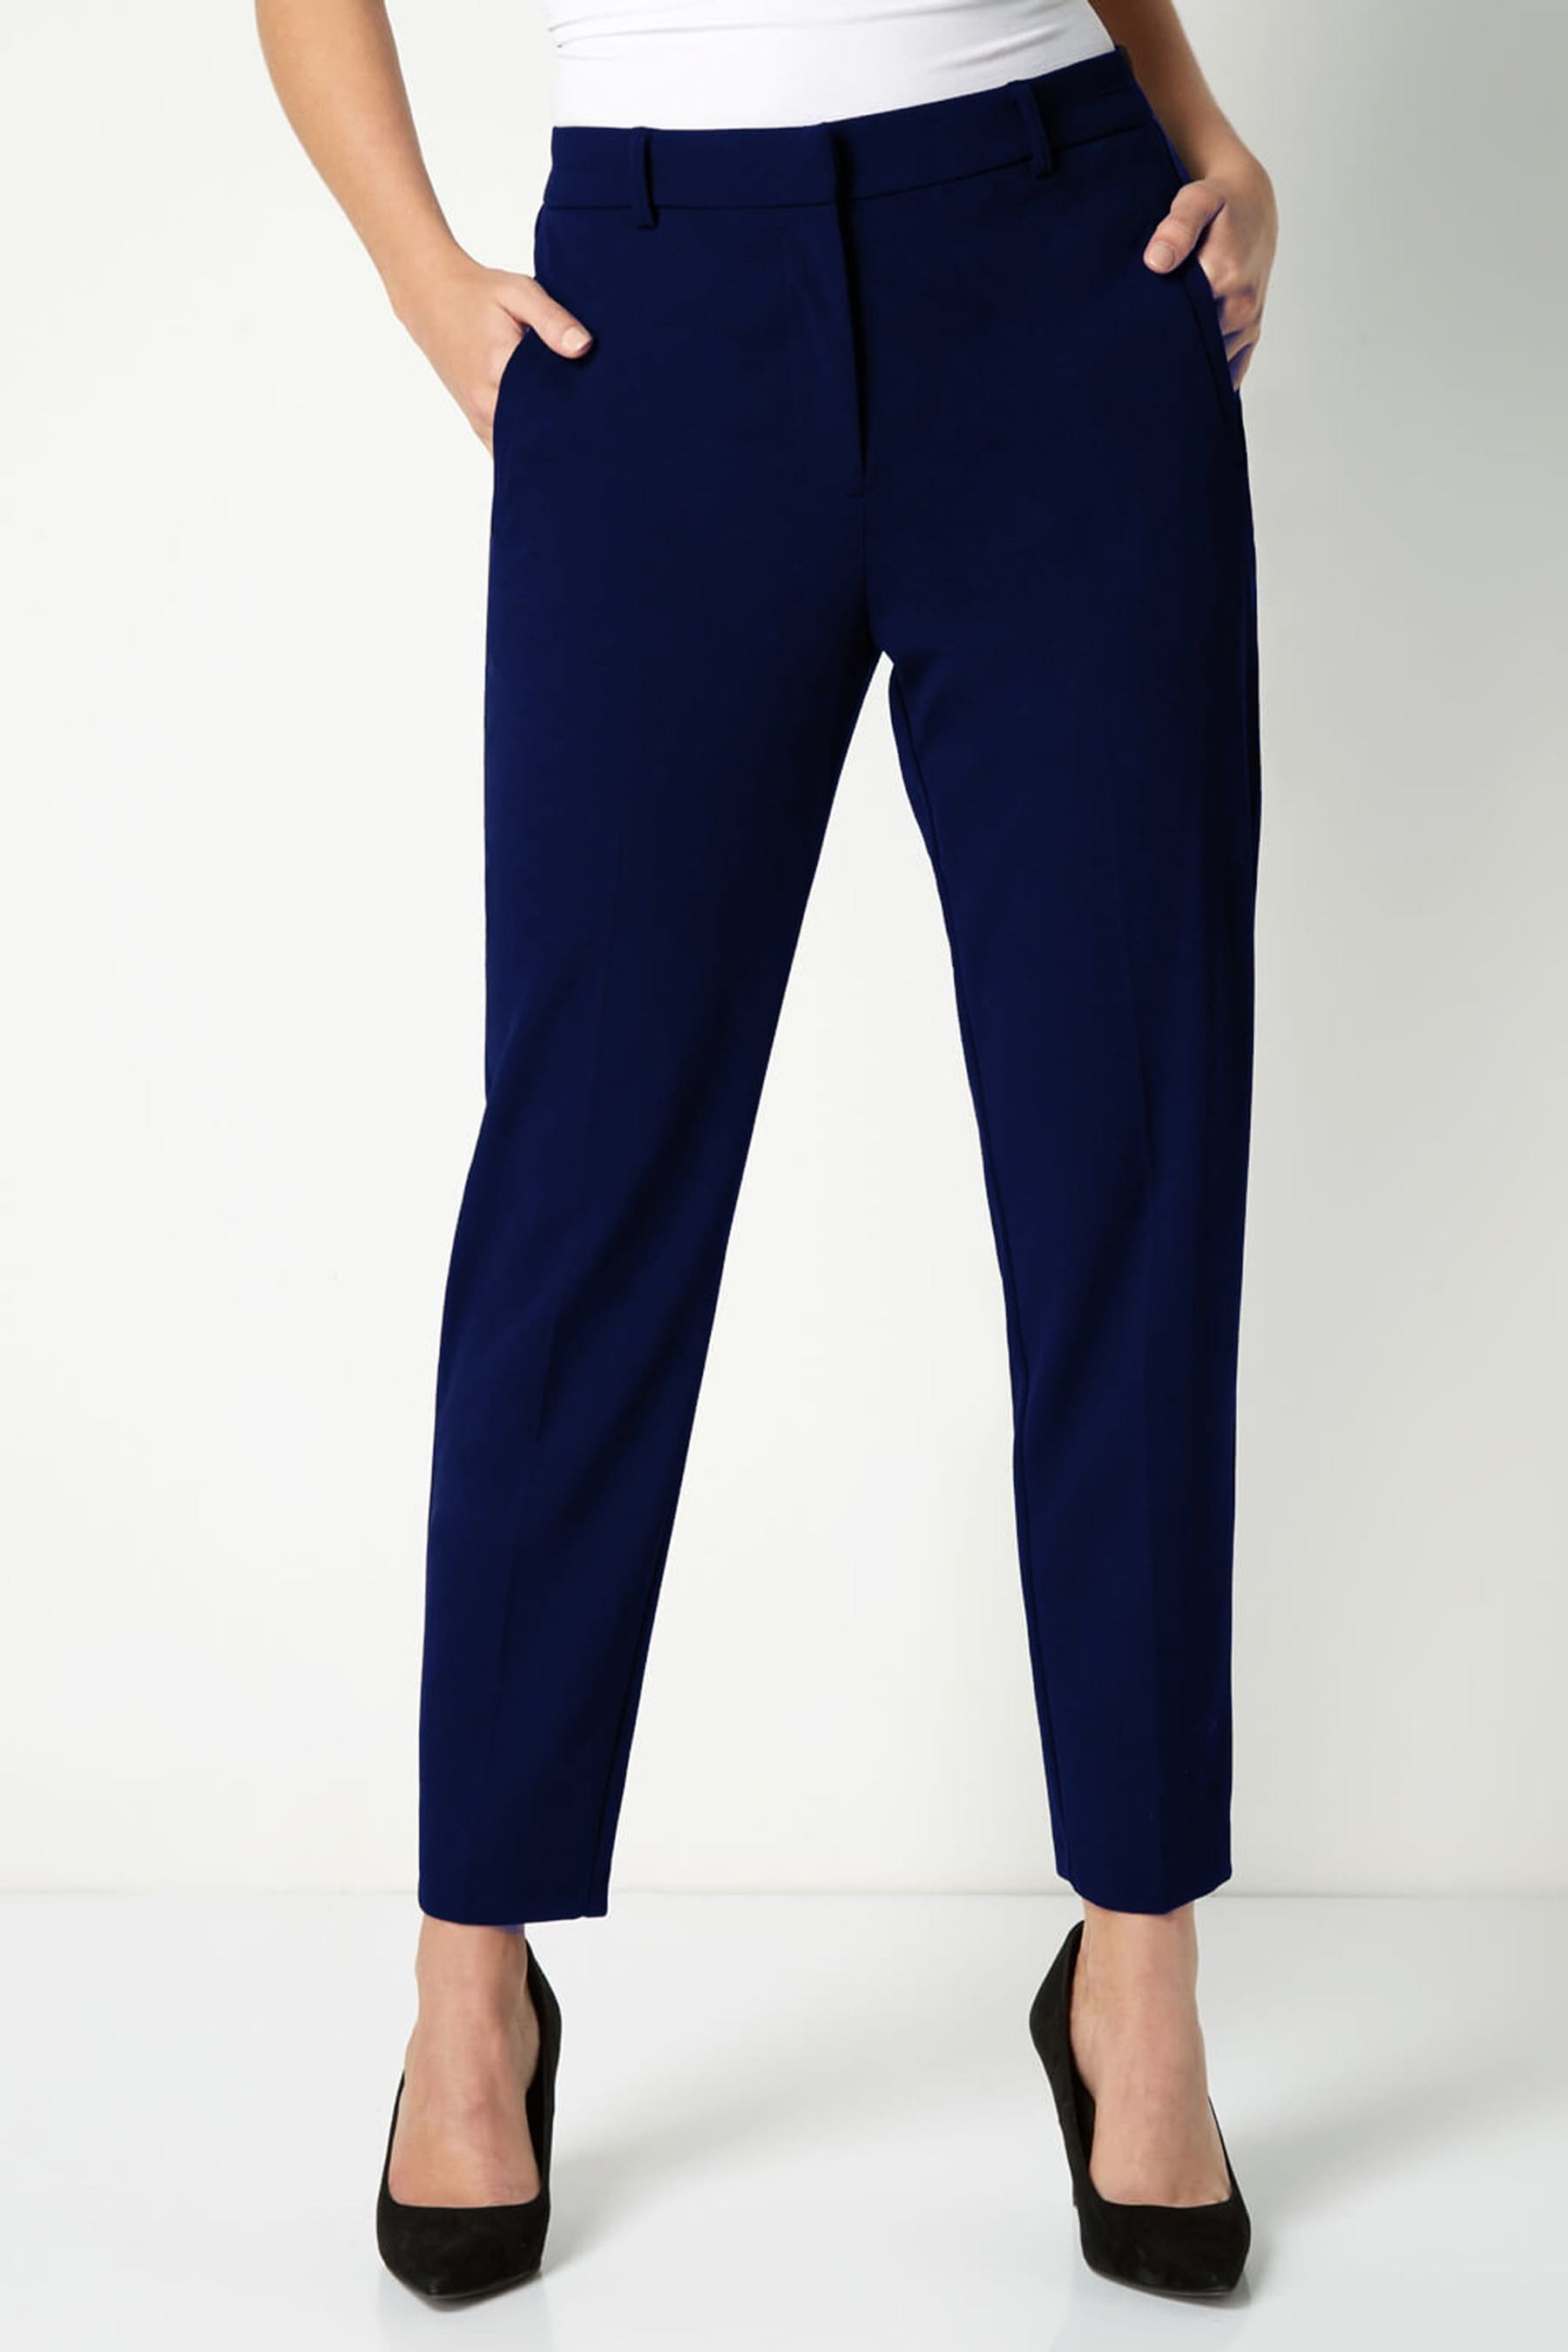 Next tall trousers